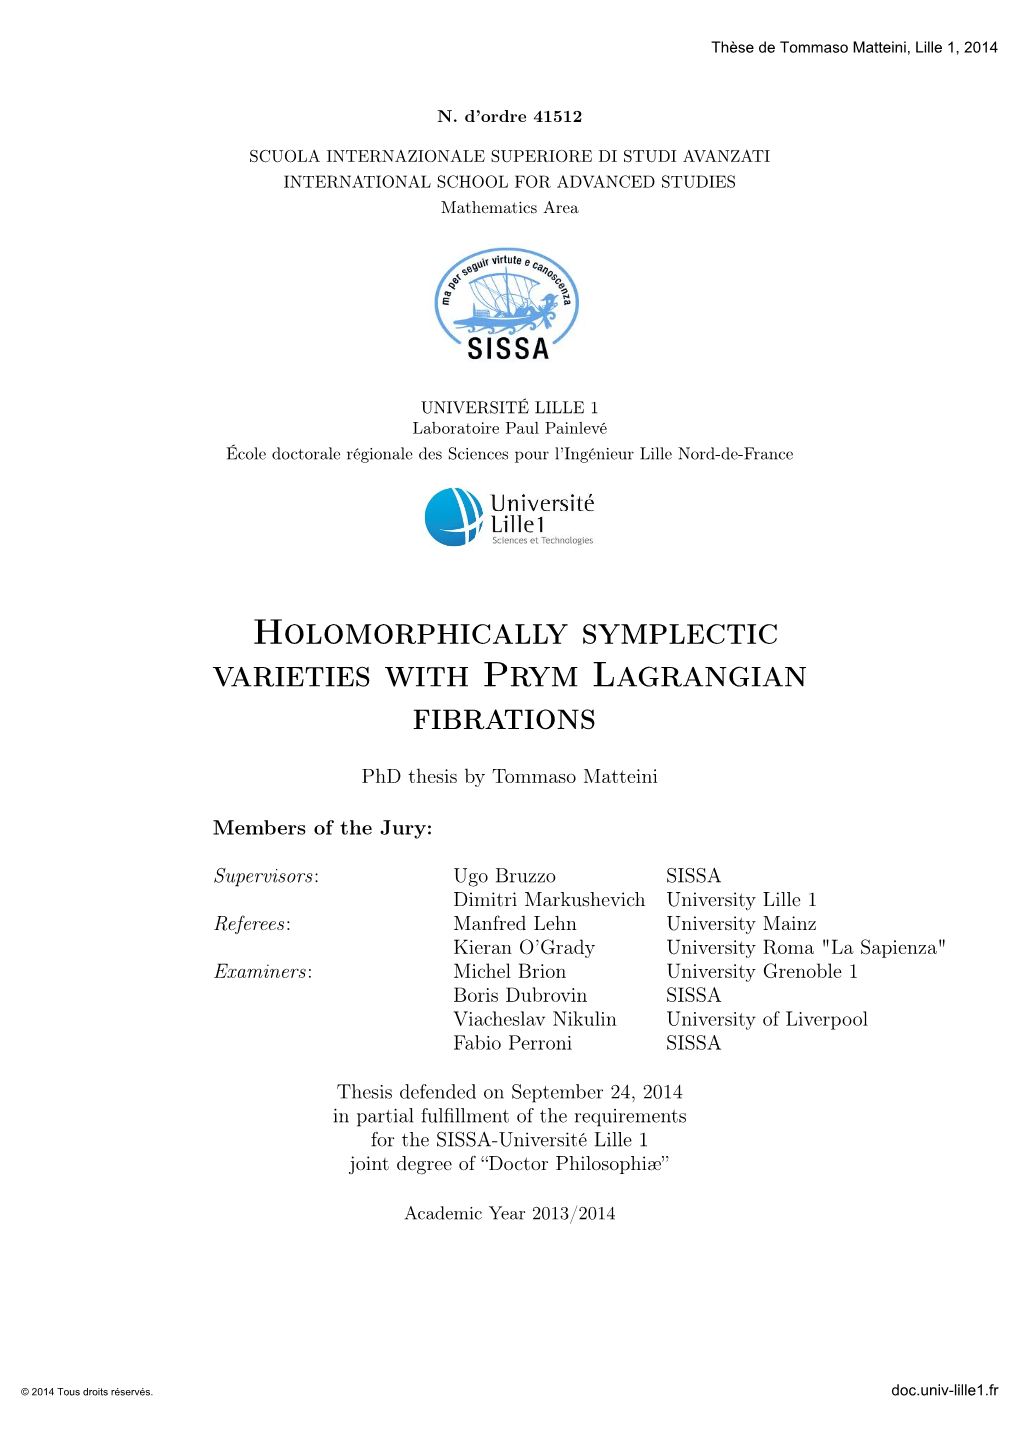 Holomorphically Symplectic Varieties with Prym Lagrangian Fibrations